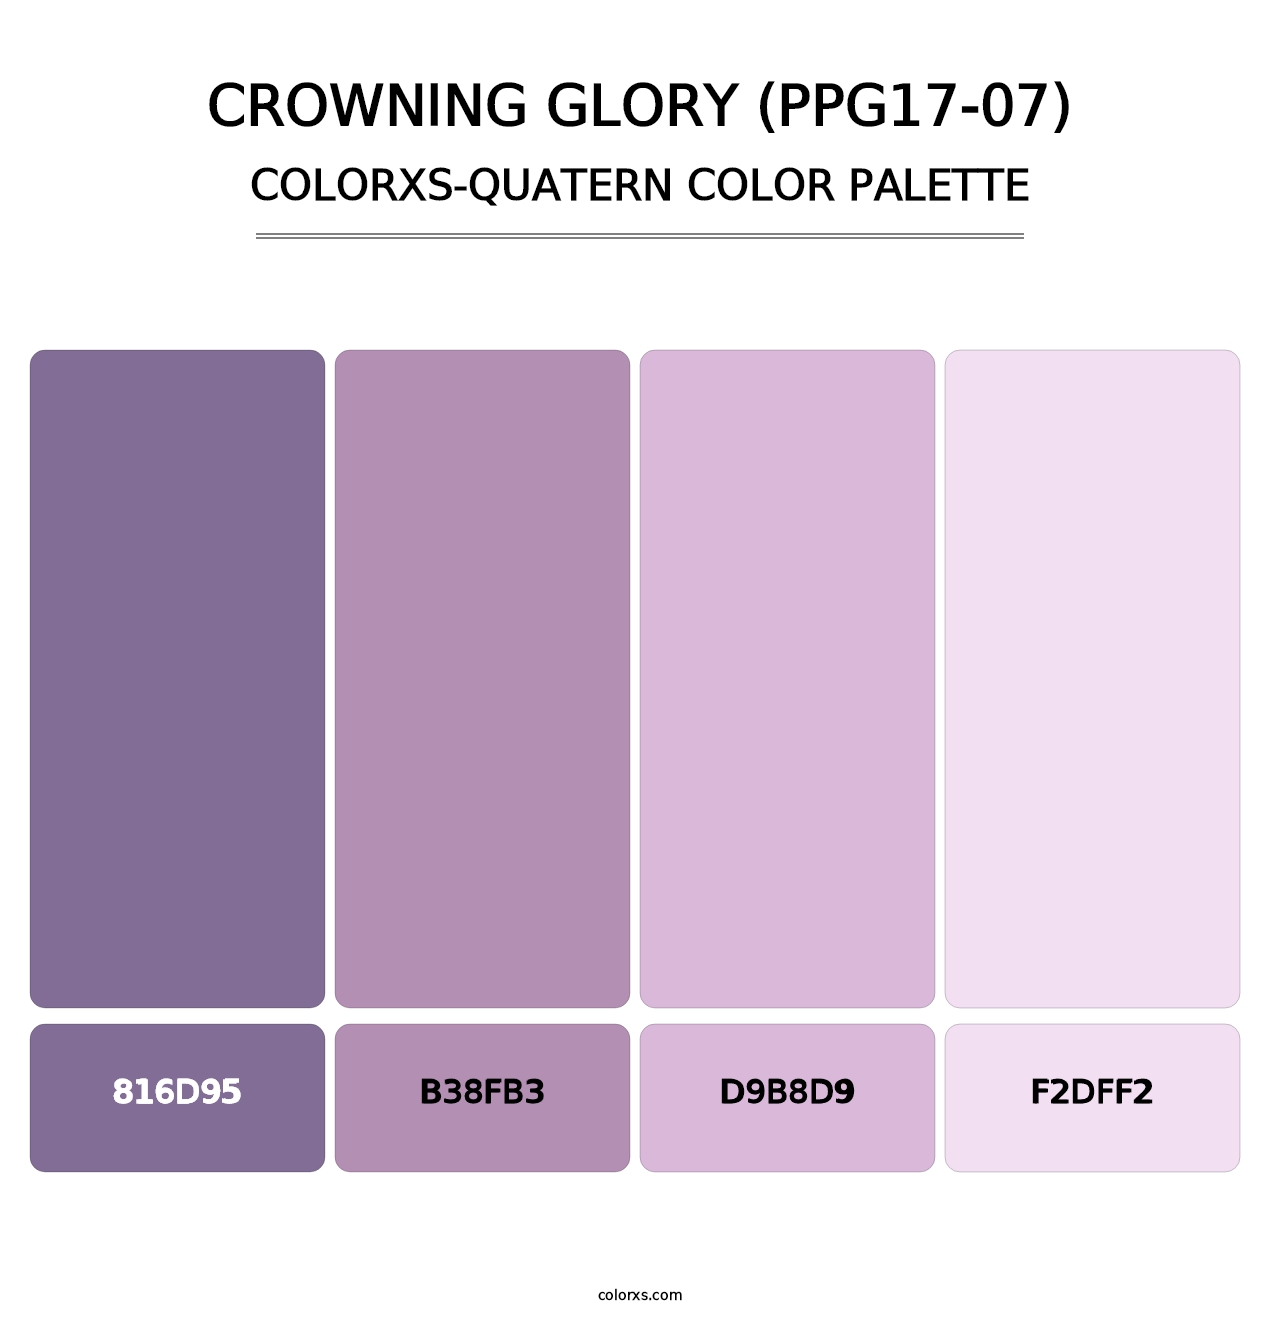 Crowning Glory (PPG17-07) - Colorxs Quatern Palette